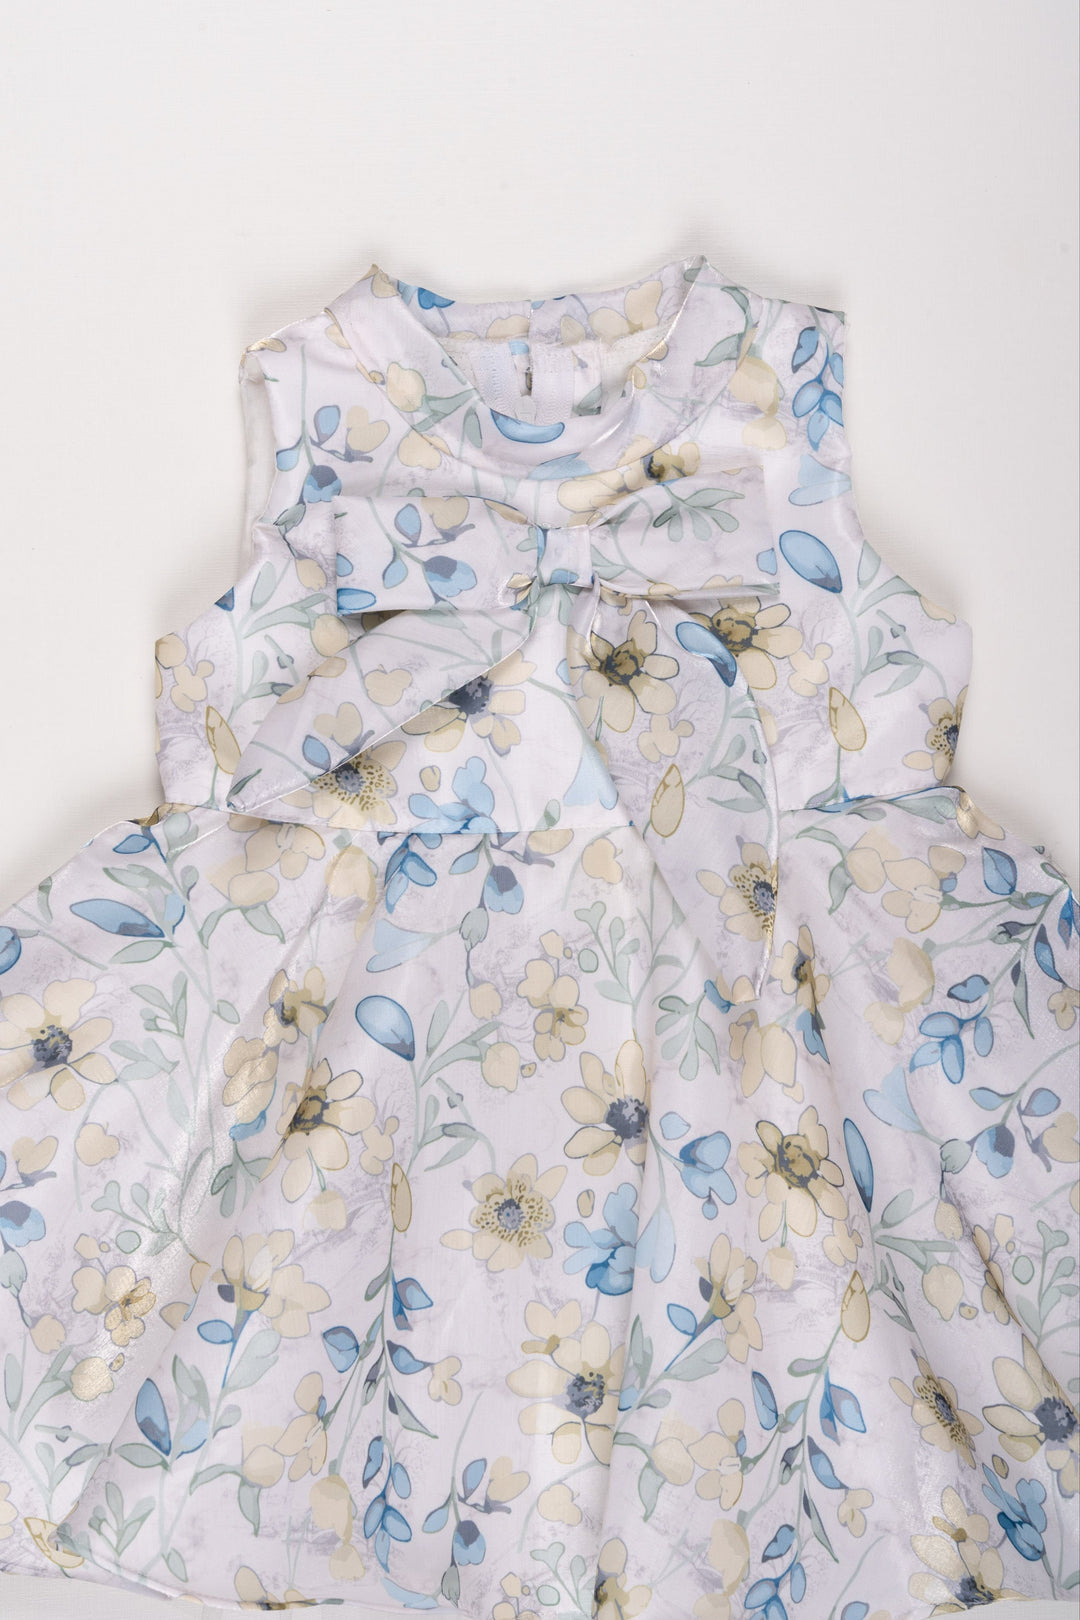 The Nesavu Girls Fancy Frock Sunny Blossom Delight: Girls' Cream Floral Dress with Sparkling Collar Detail Nesavu Girls Cream Floral Sleeveless Dress | Sparkling Collar | Joyful Day Wear | The Nesavu